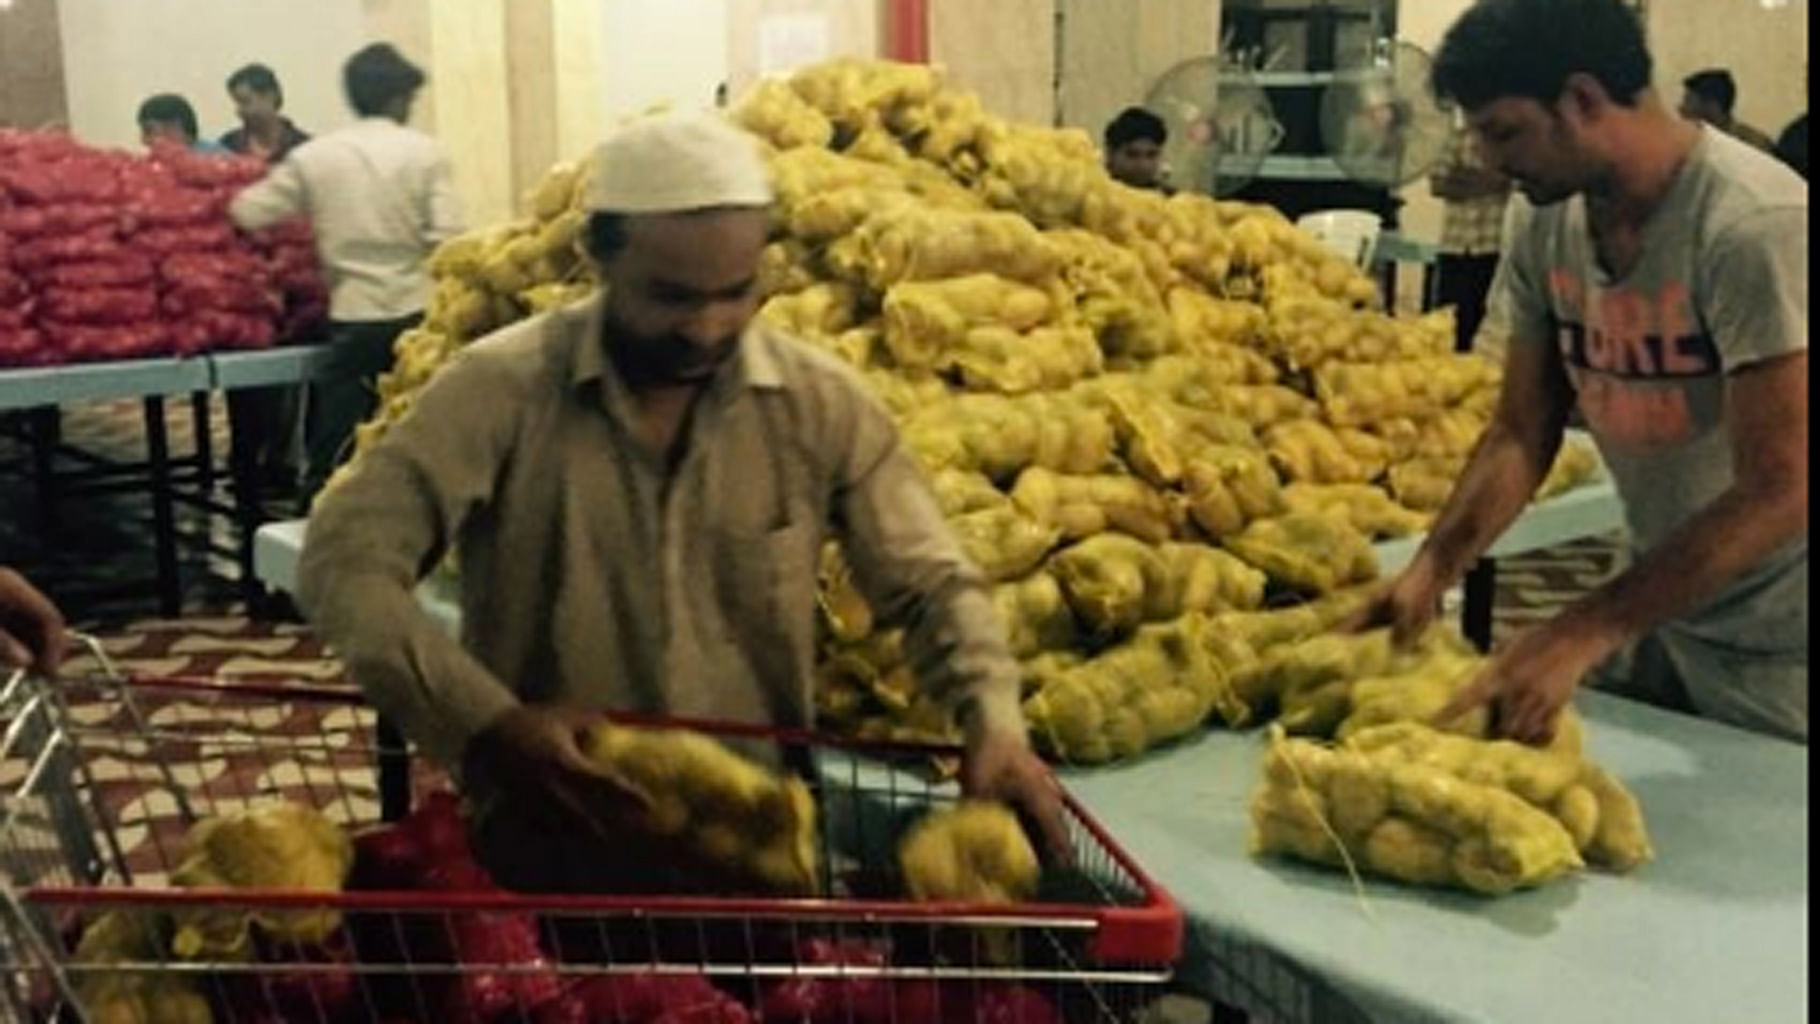 Indians receive food aid from Indian Consulate in Jeddah, Saudi Arabia. (Photo Courtesy: Twitter/<a href="https://twitter.com/CGIJeddah/media">@CGIJeddah</a>)